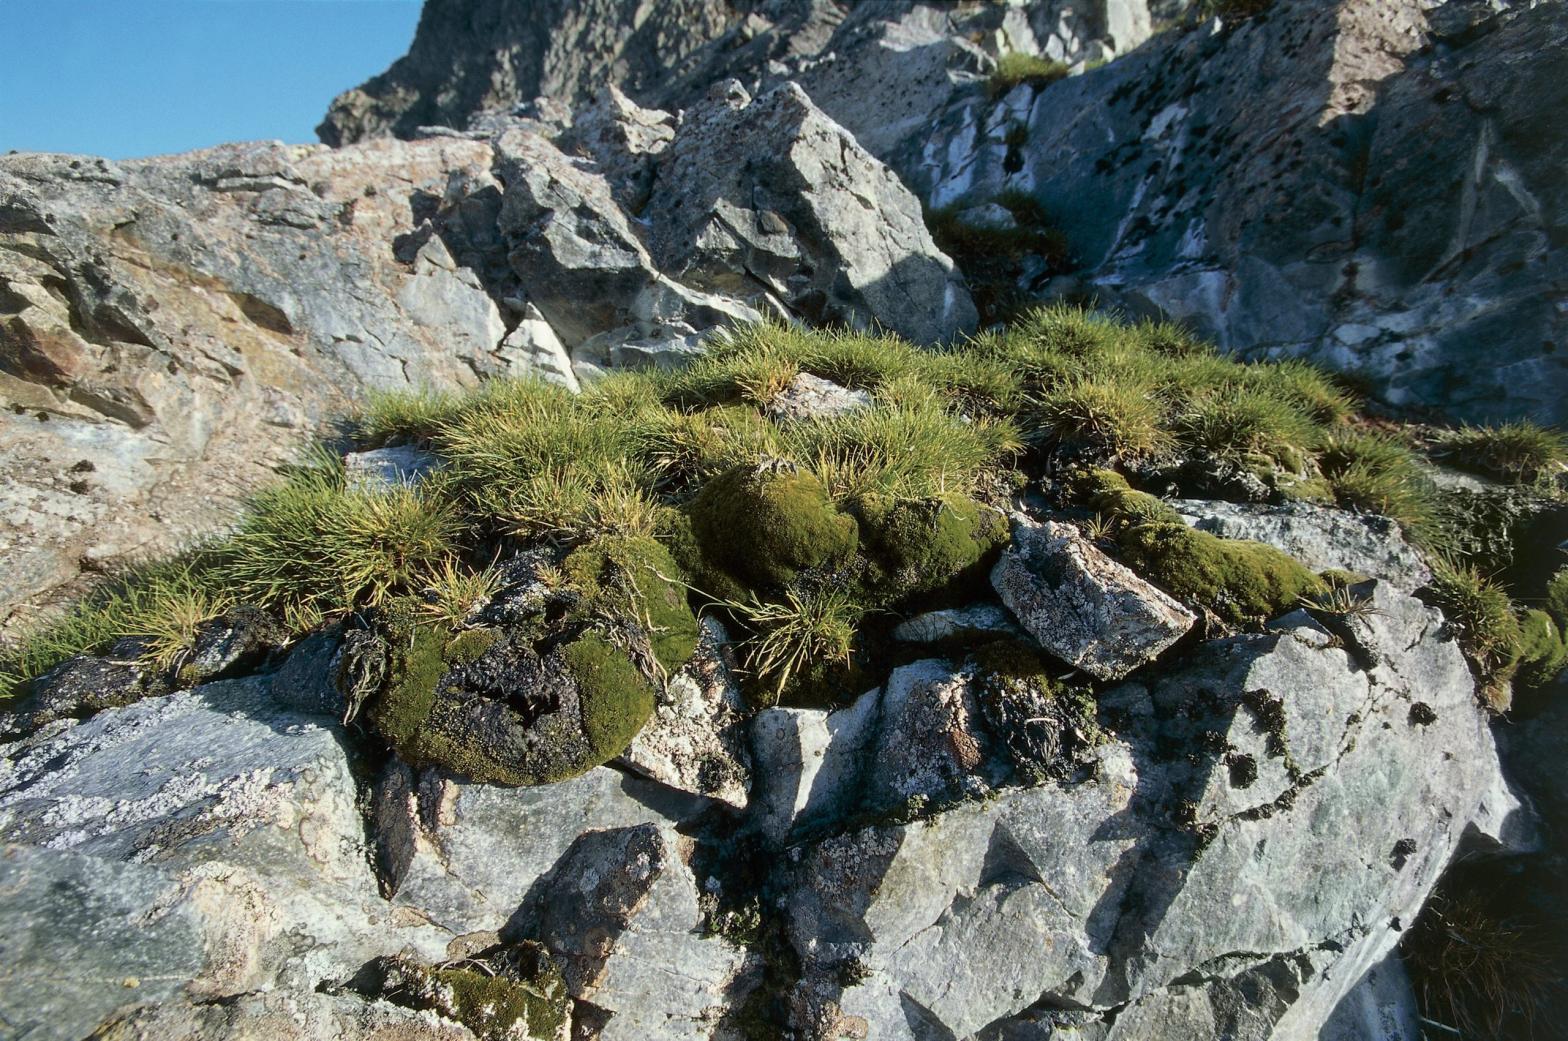 Antarctic hair grass growing on rocks at Couverville Island, Antarctica.